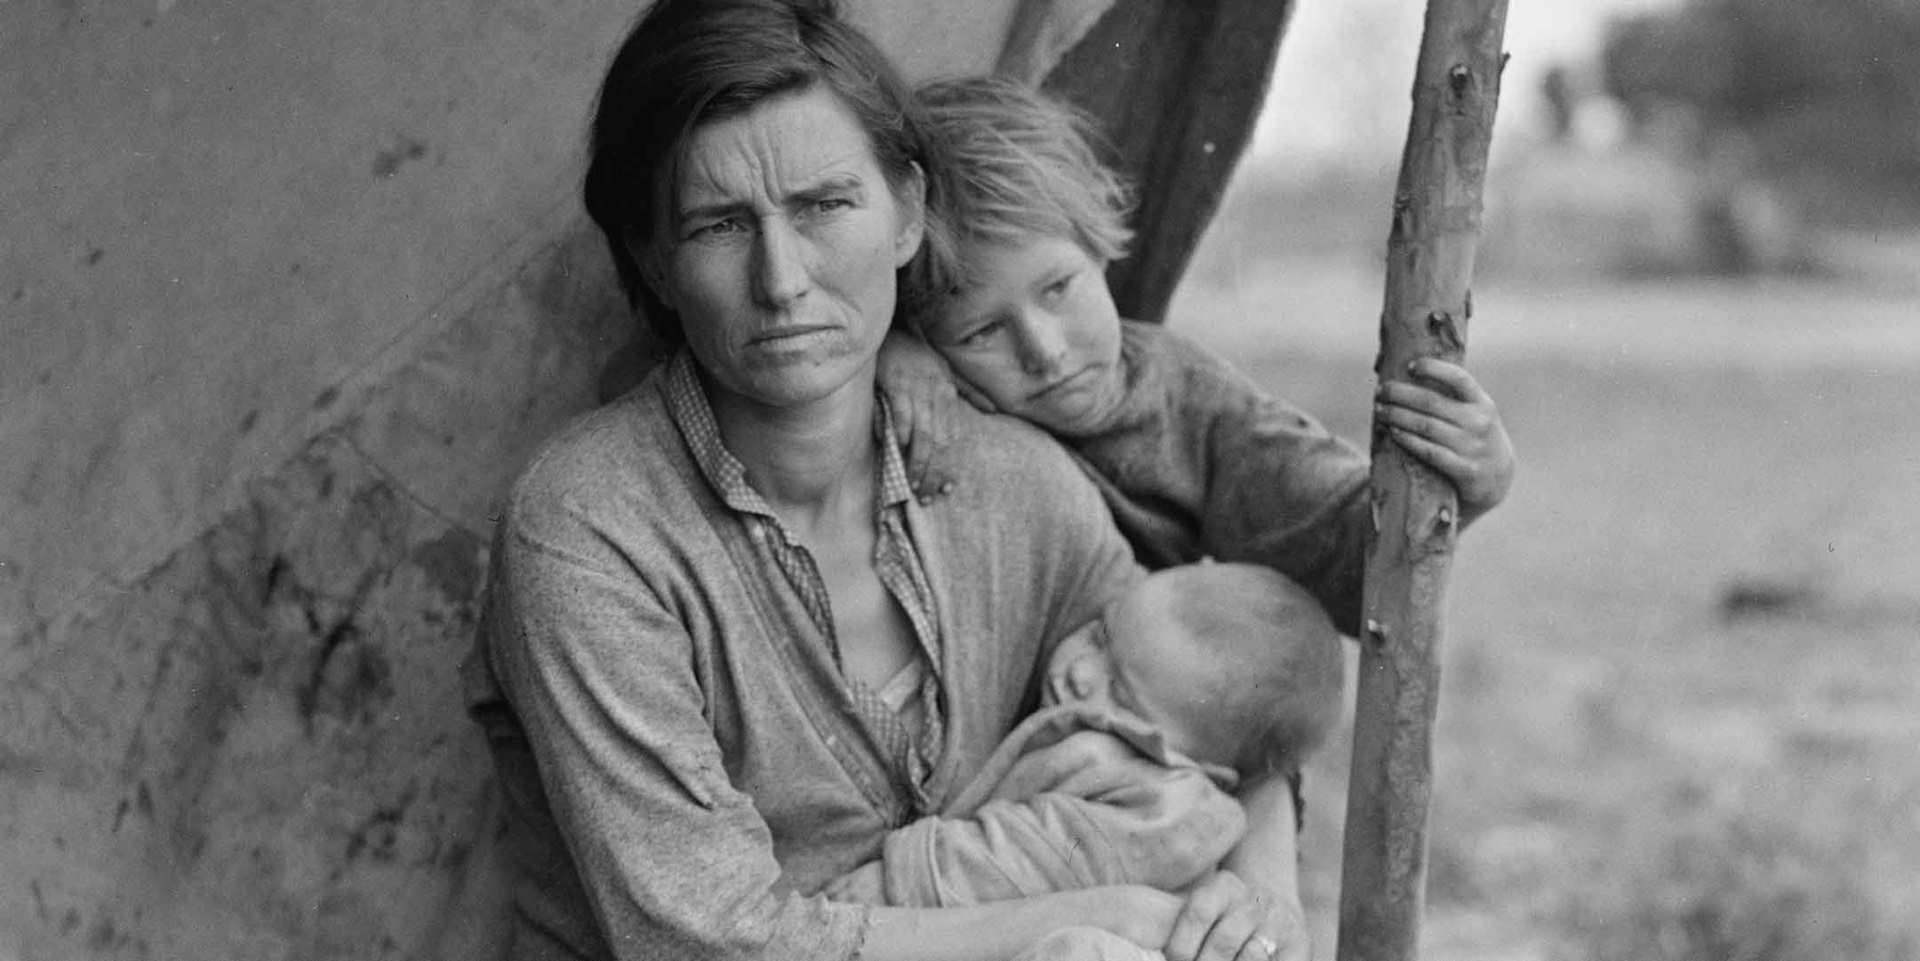 Migrant agricultural worker's family, Nipomo California. Photo by Dorothea Lange. February 1936. Courtesy Farm Security Administration–Office of War Information Photograph Collection, Library of Congress.